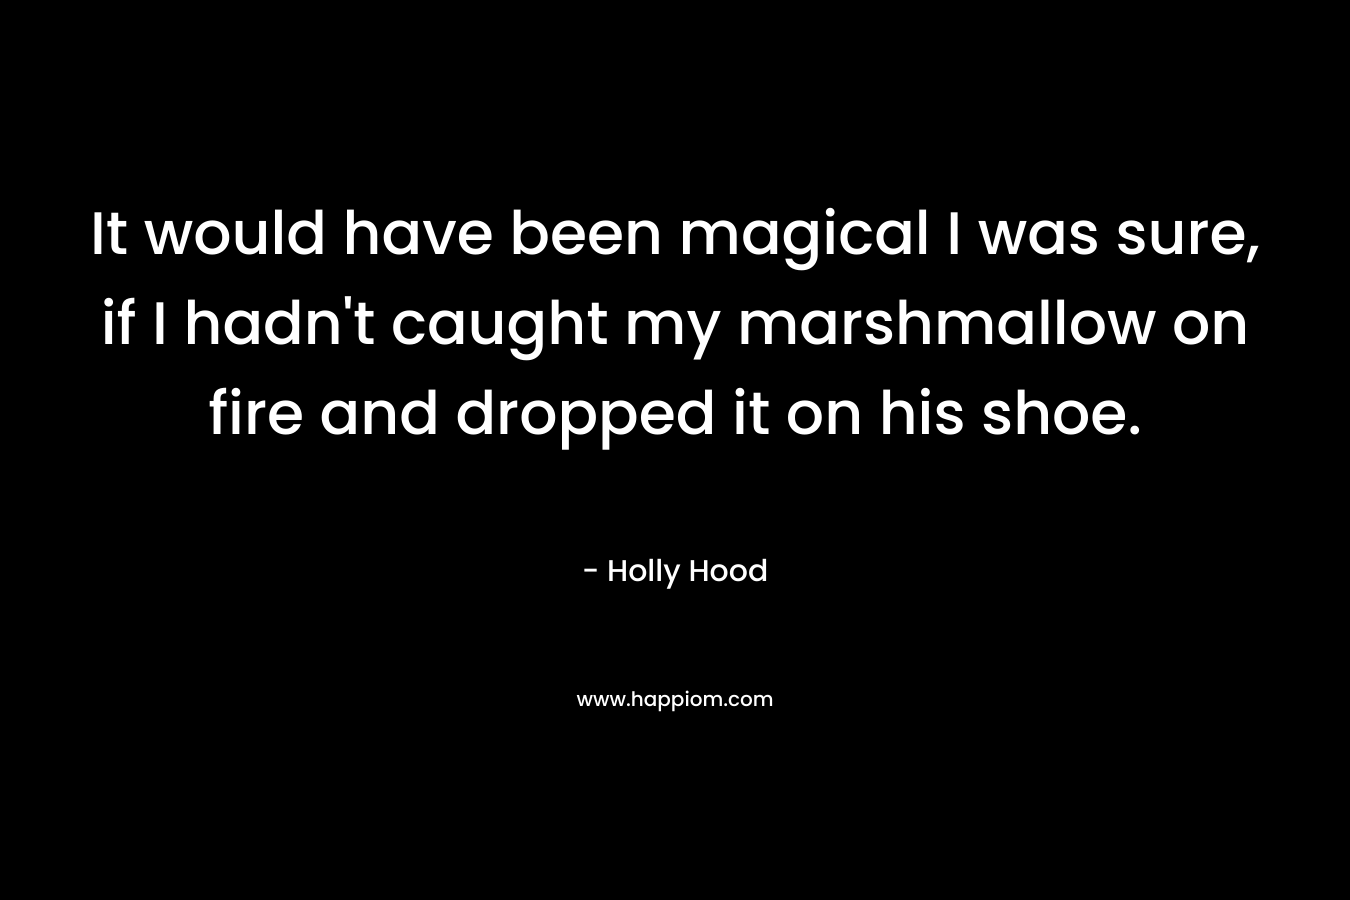 It would have been magical I was sure, if I hadn’t caught my marshmallow on fire and dropped it on his shoe. – Holly Hood